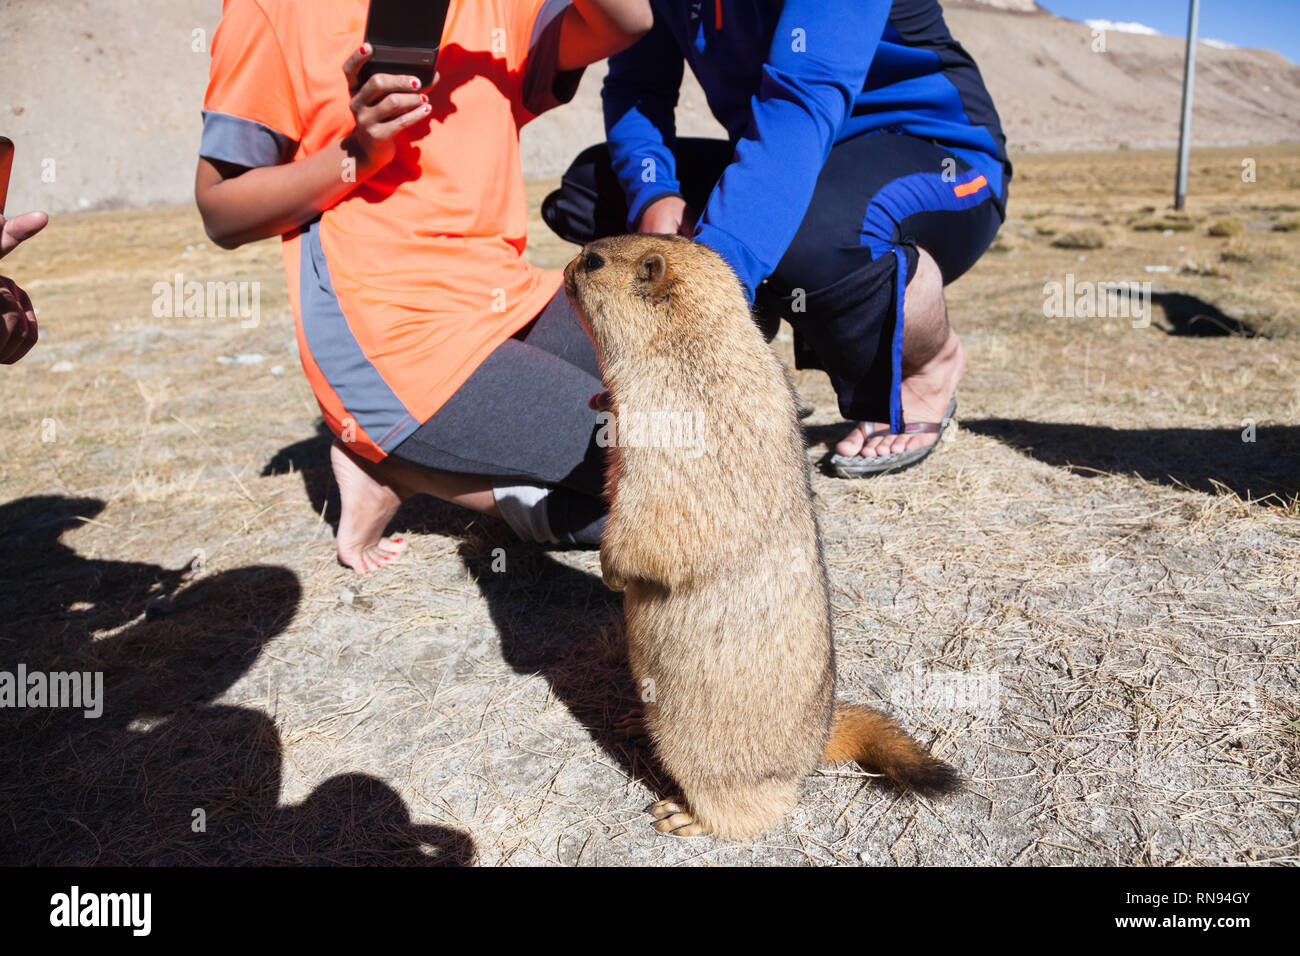 Tourists observing and photographing marmot during trip to Pangong Tso, Ladakh, Jammu and Kashmir, India Stock Photo